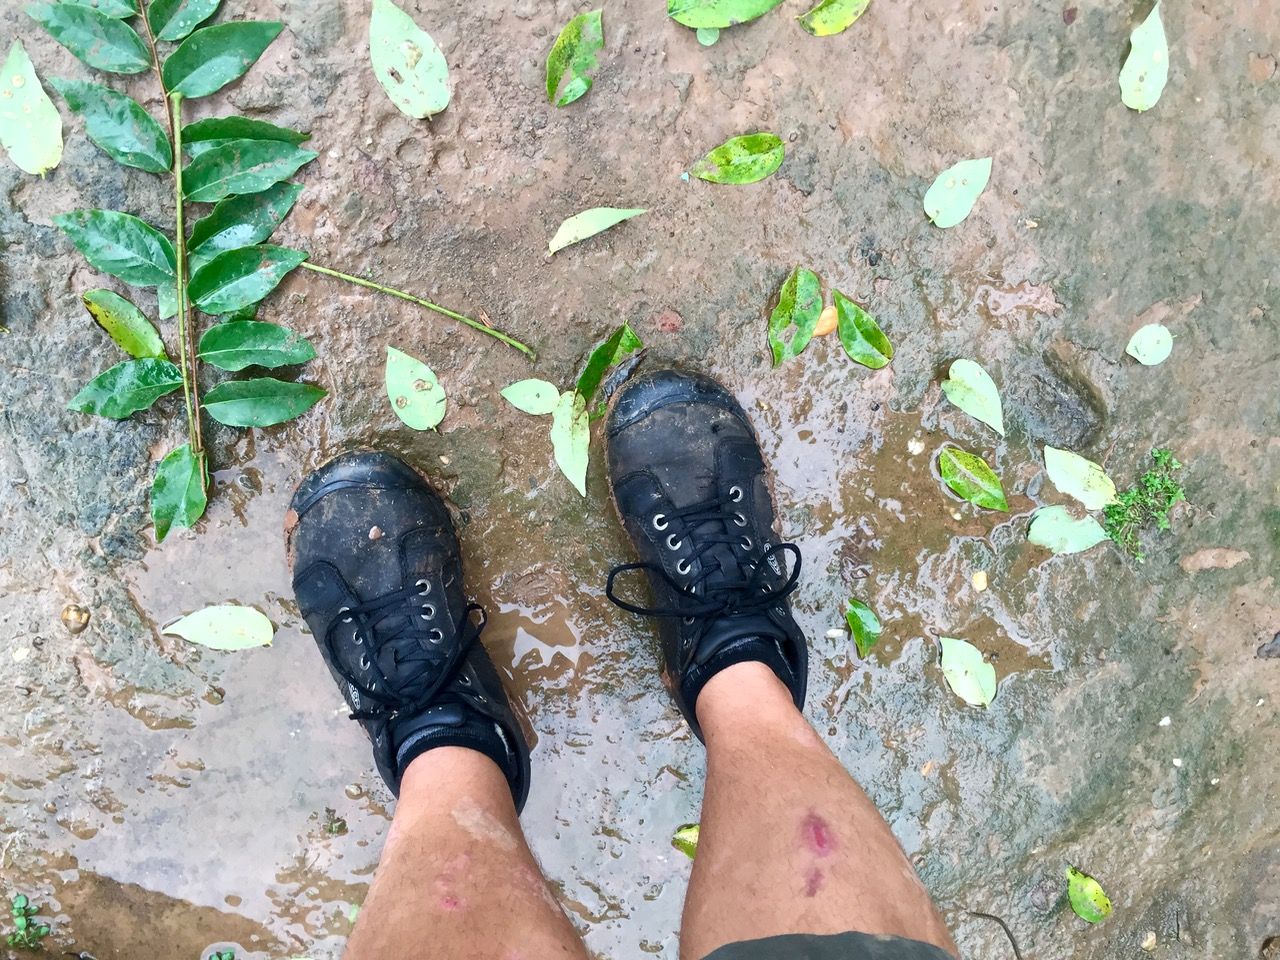 Muddy shoes in the rain.